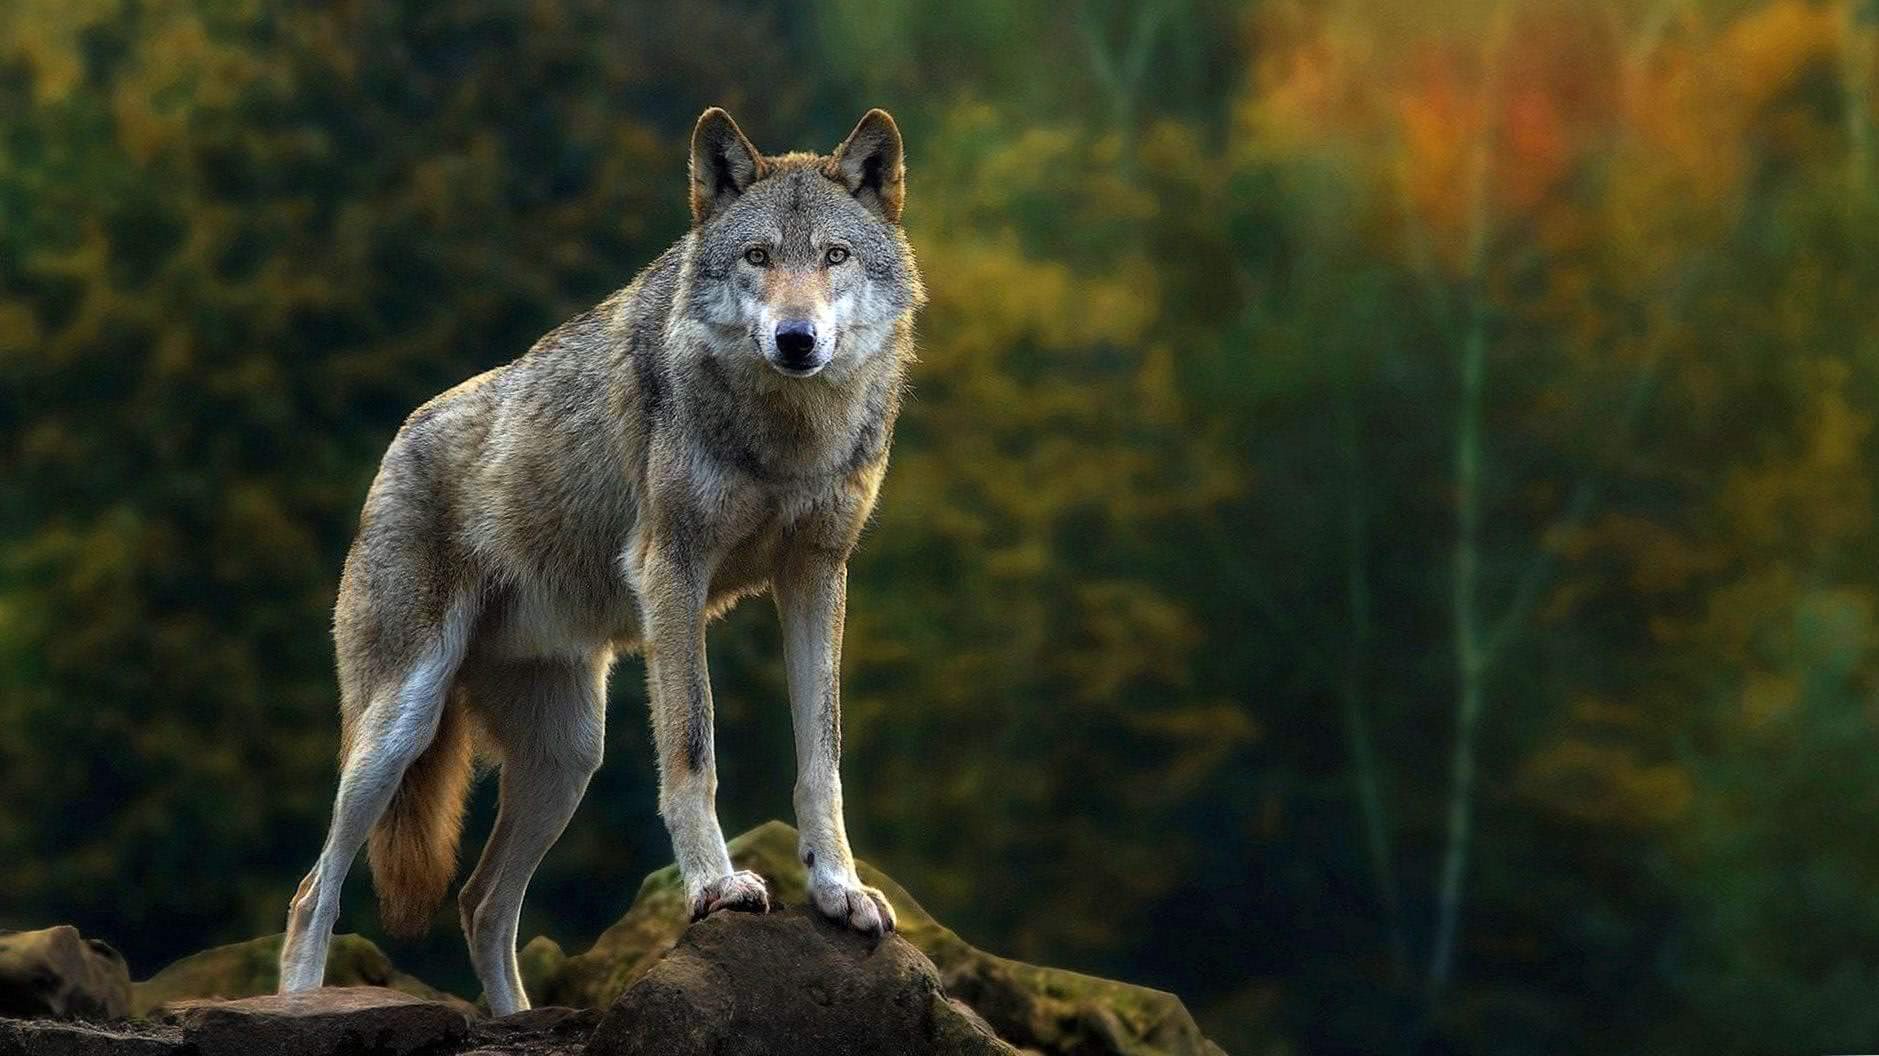 hd wallpaper 1366×768 wolf background image 3